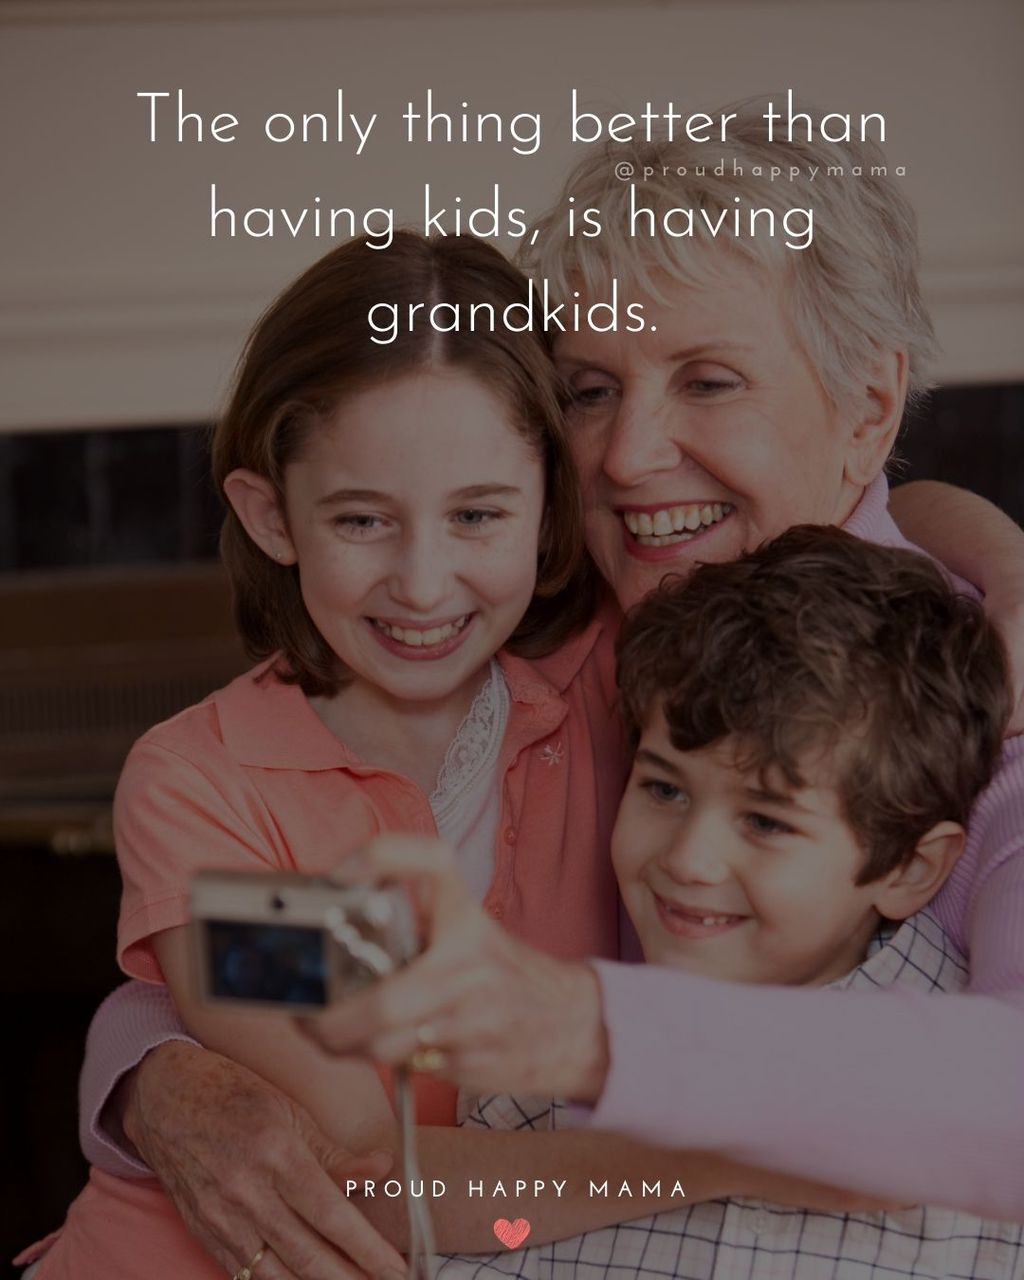 Quotes for Grandchildren - The only thing better than having kids, is having grandkids.